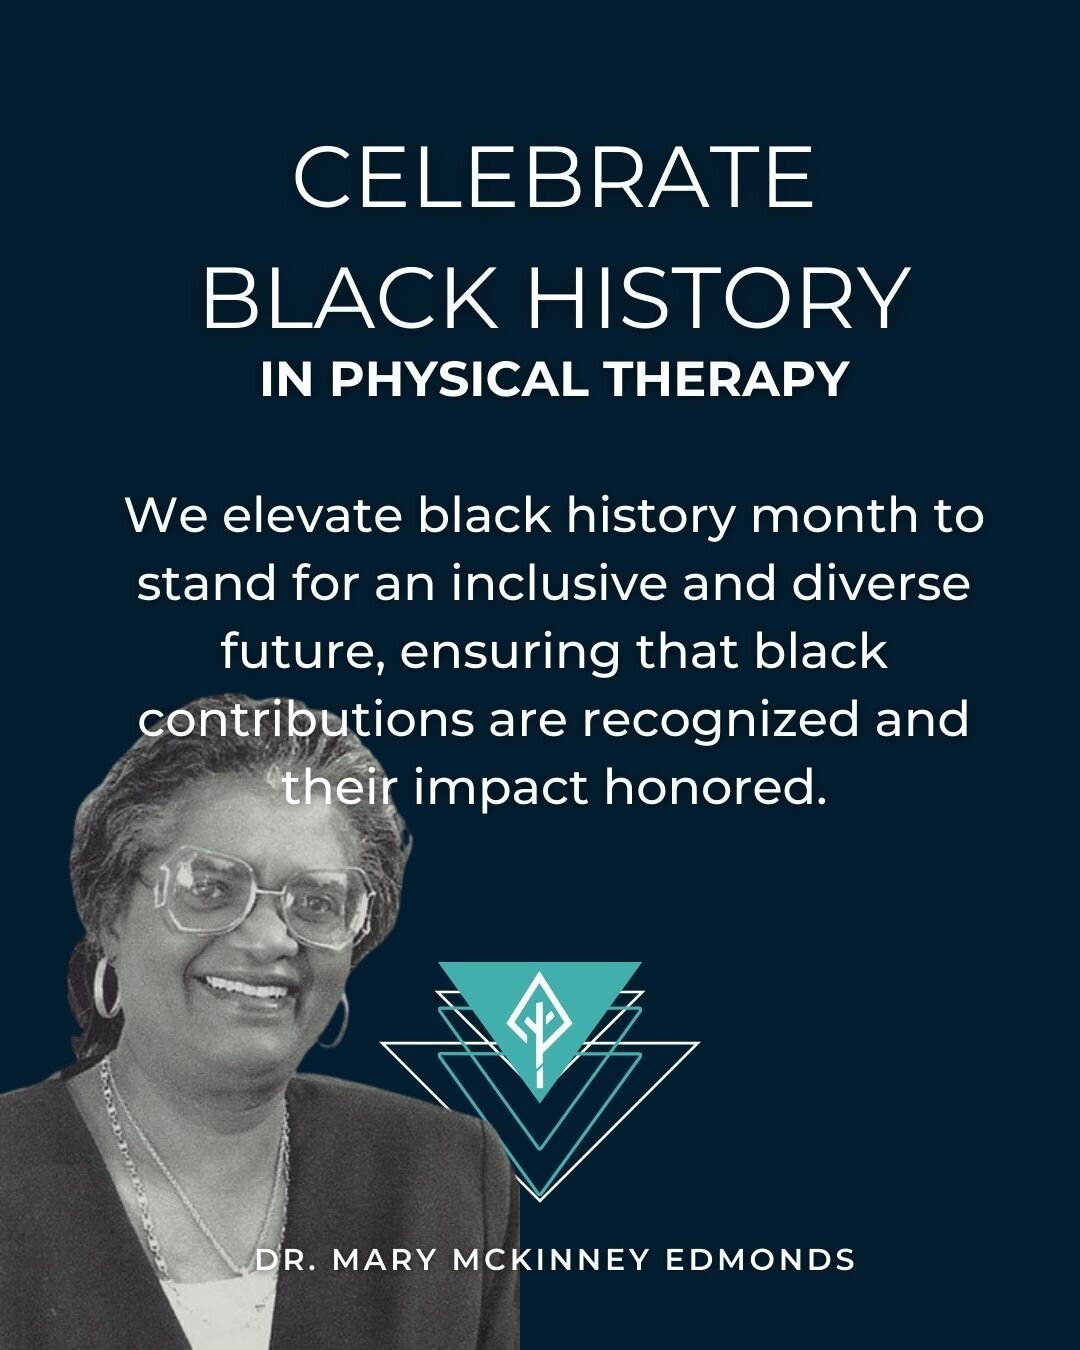 Dr. Mary McKinney Edmonds, PT, DSc, PhD, FAPTA (1932-2017) was a game changer in the field of physical therapy. She founded the physical therapy program at Clevland State University and spear headed the movement for all physical therapy education to 